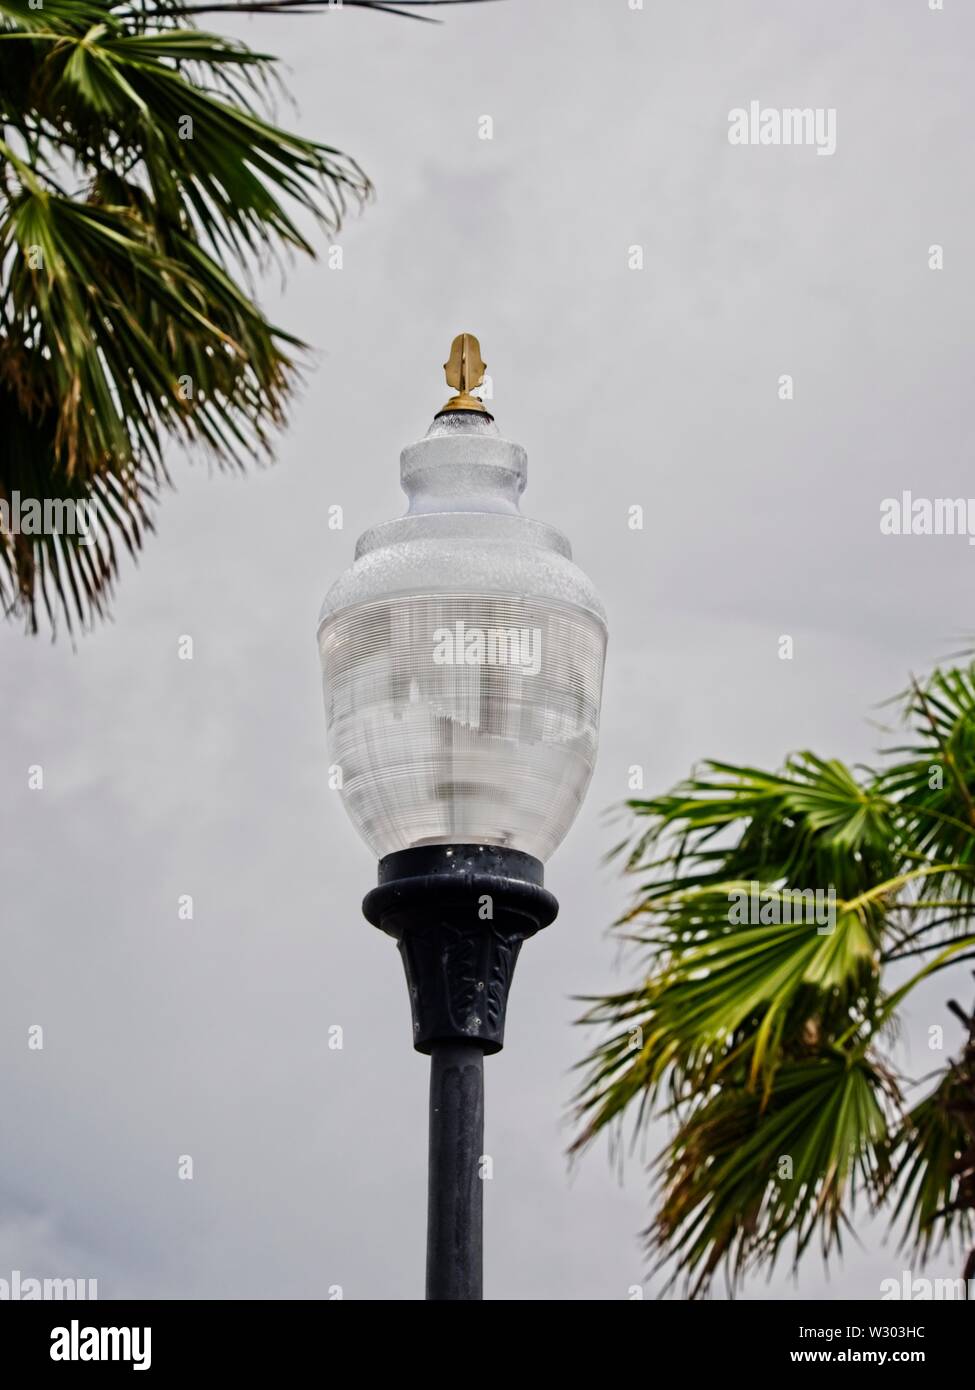 Gulf Shores, AL USA - 05/08/2019  -  Street Lamp with Palm Trees Stock Photo